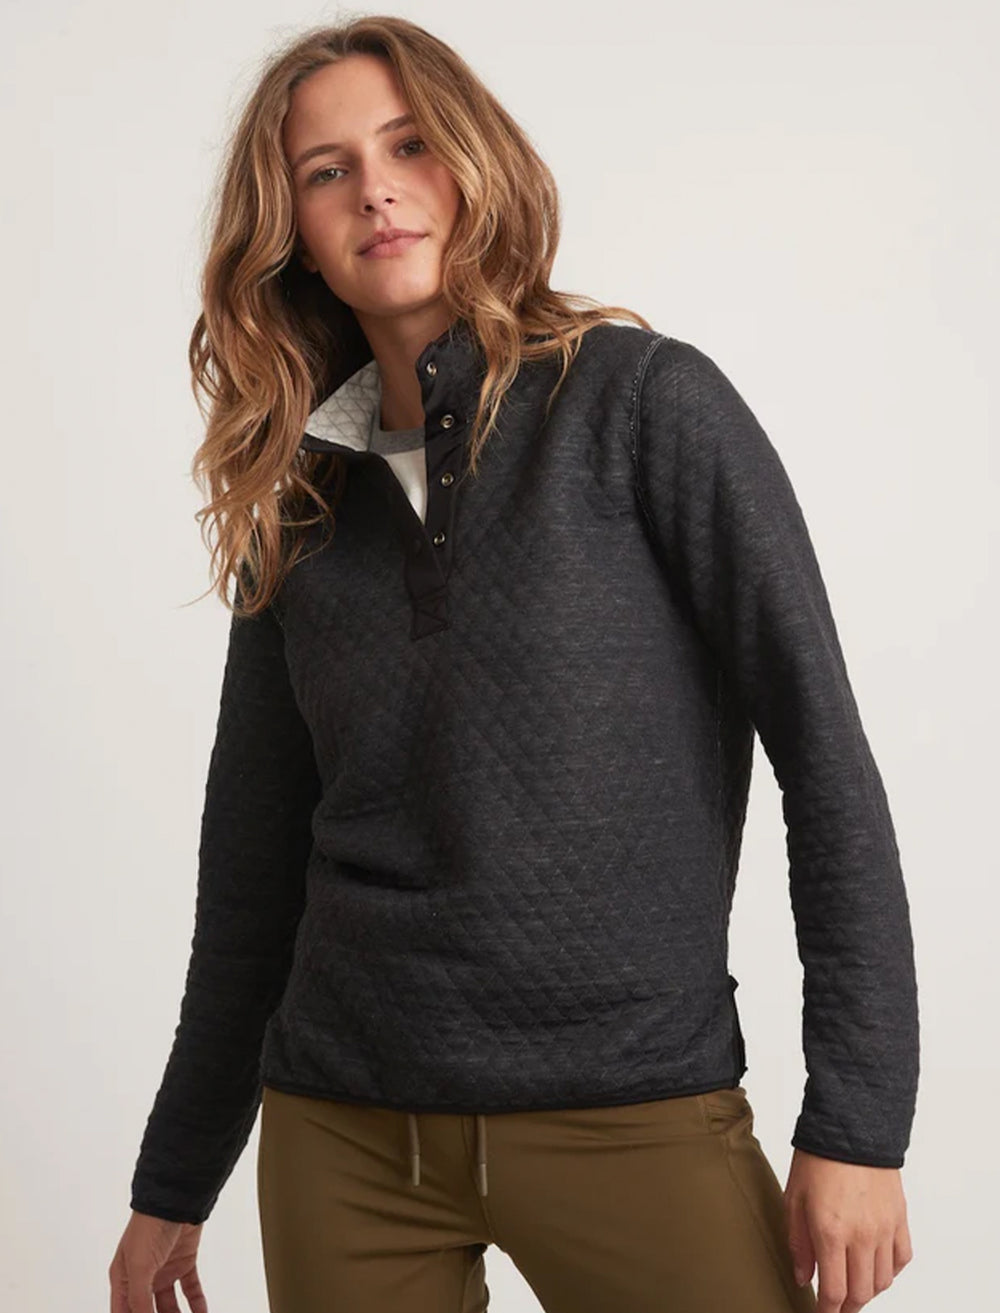 Model wearing the reverse side of Marine Layer's corbet reversible pullover in white and black.